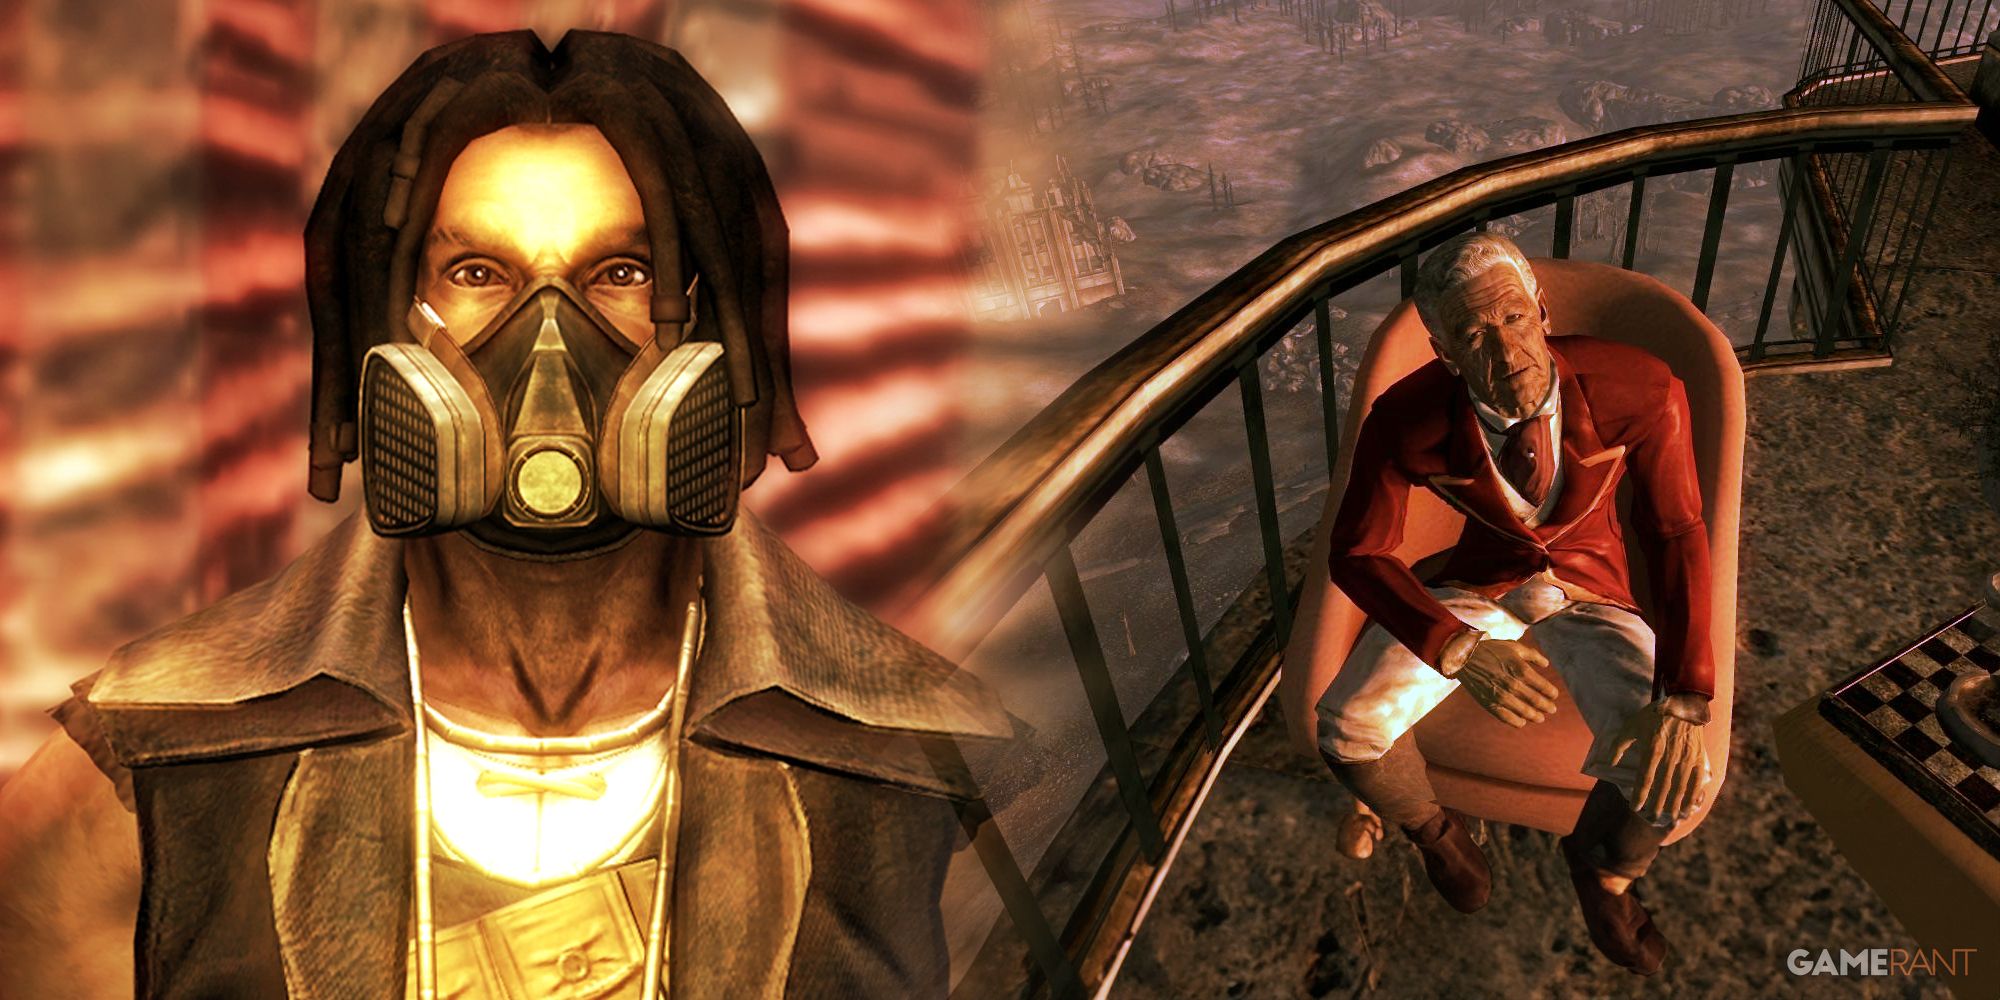 Fallout Ulysses (Fallout: New Vegas – Lonesome Road DLC), Allistair Tenpenny (Fallout 3)